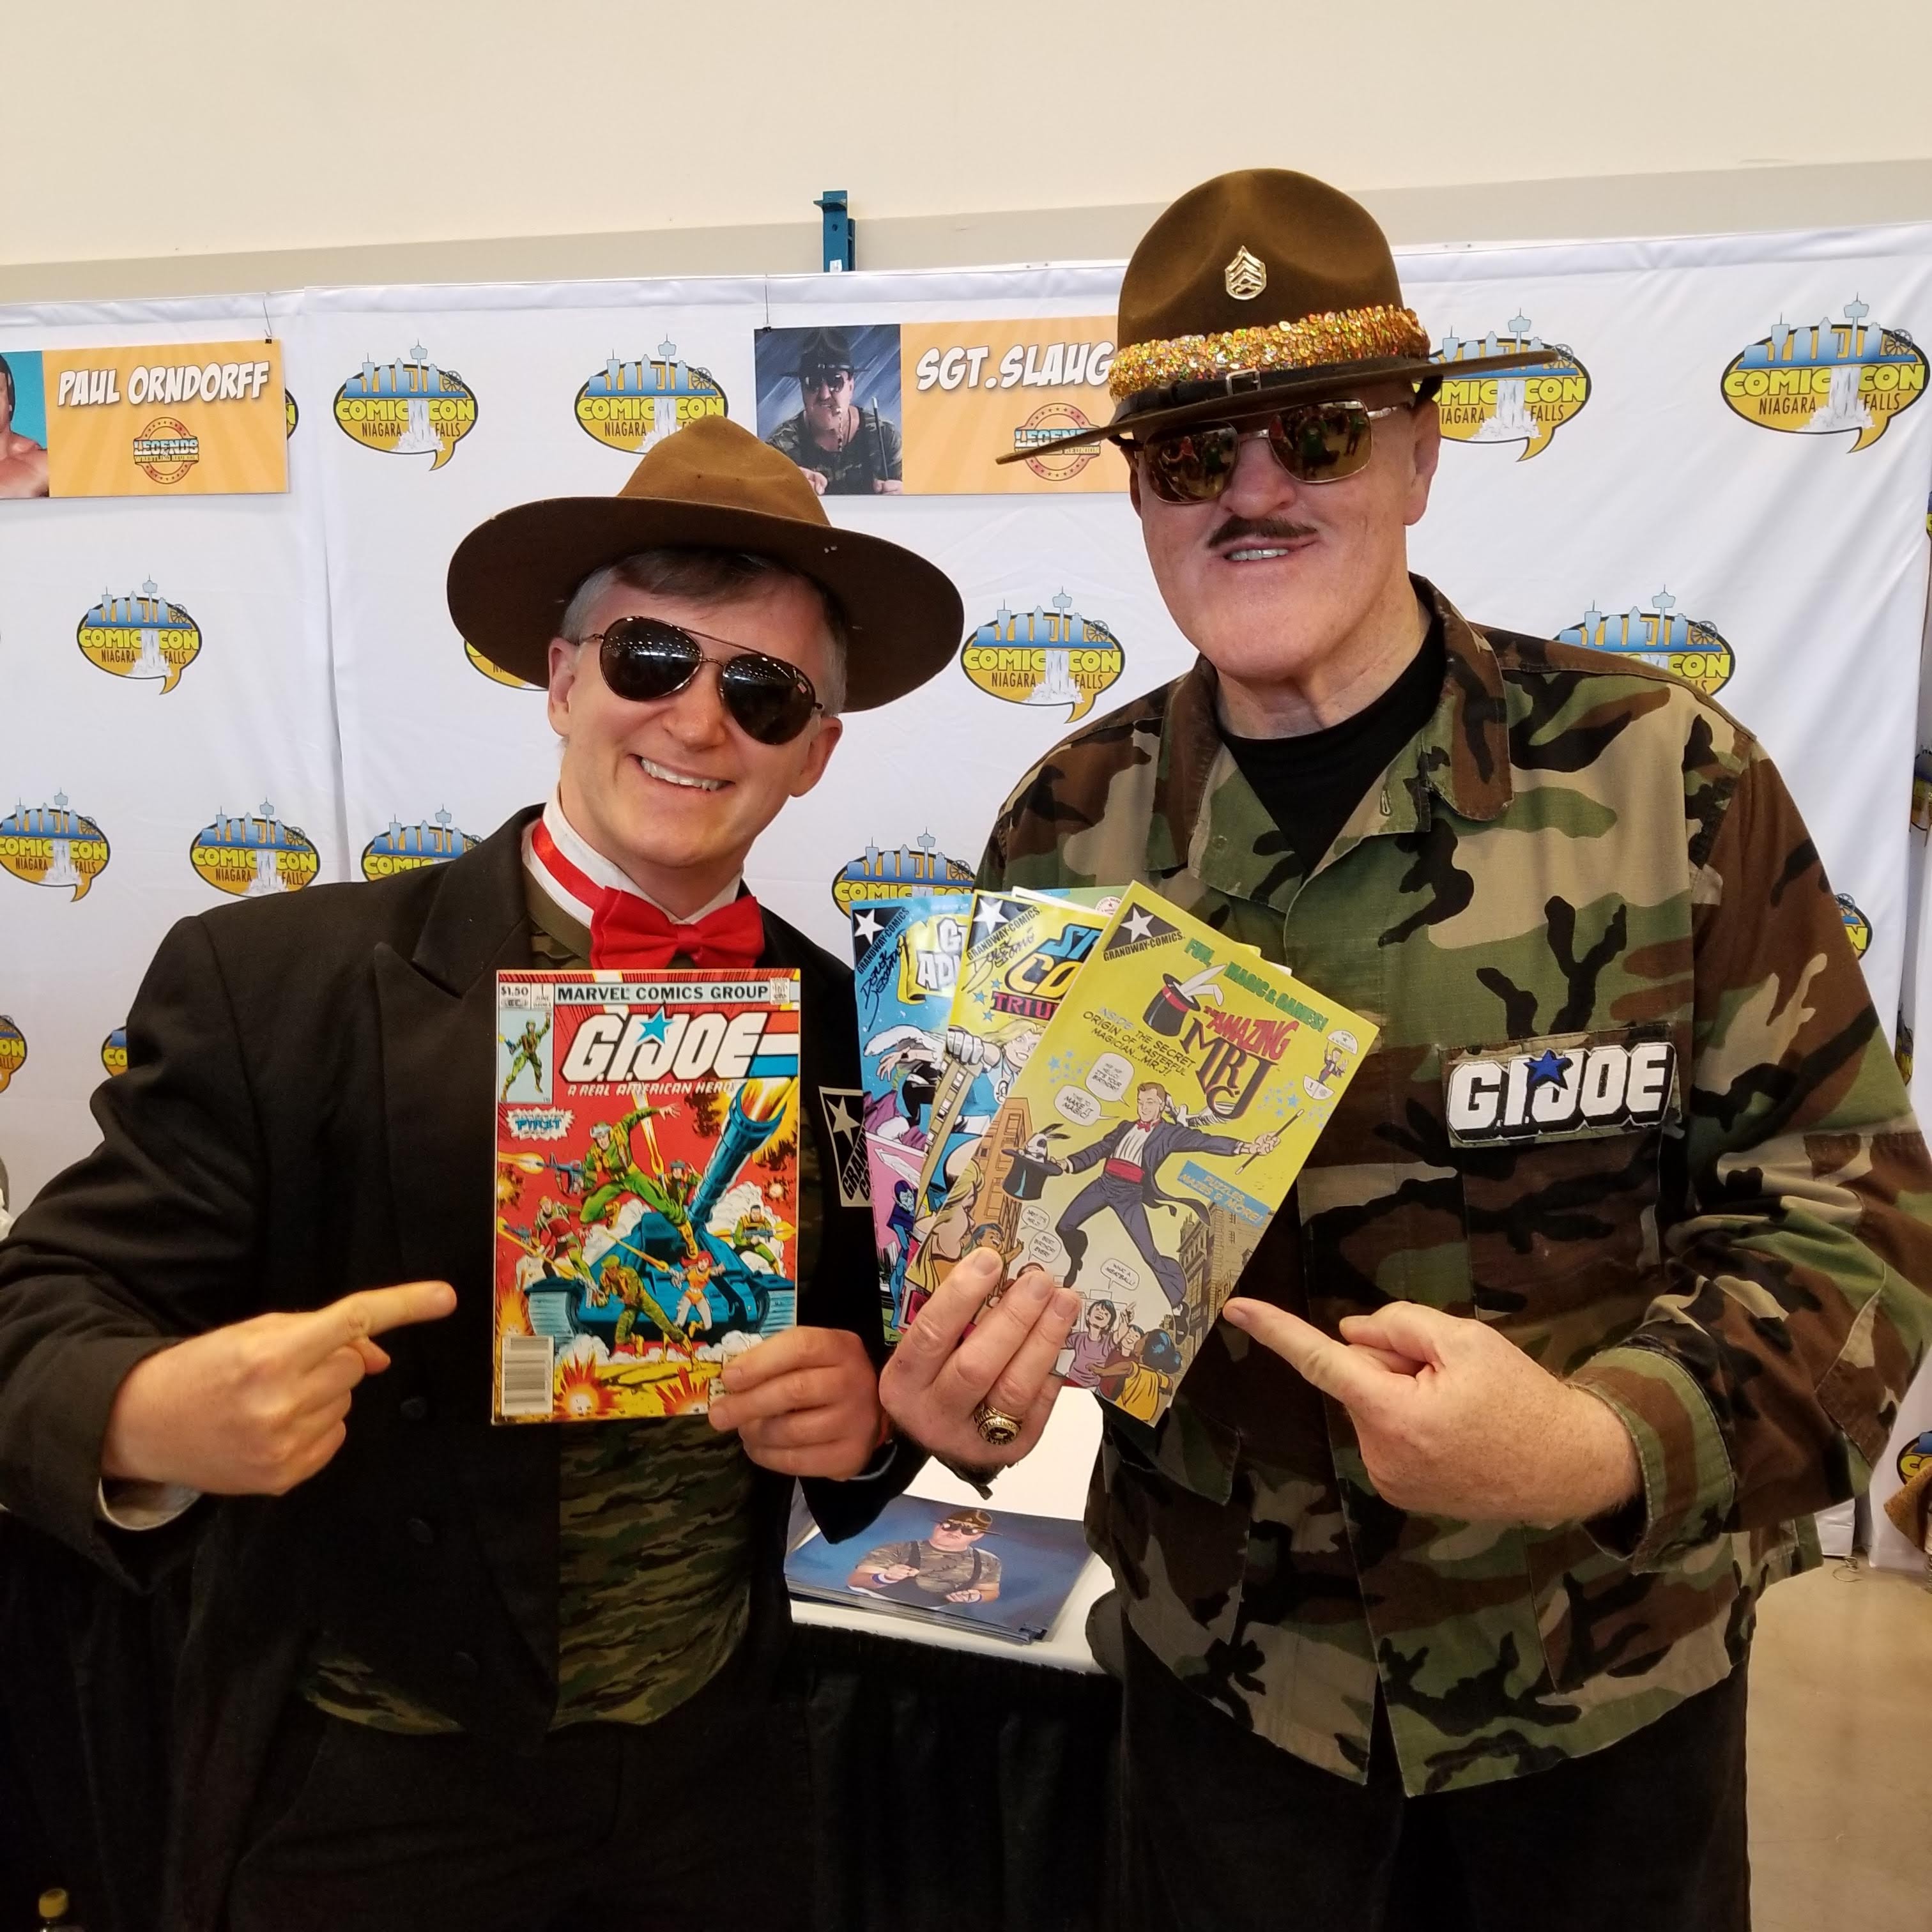 Sgt. Slaughter (Looking at each others' comics)